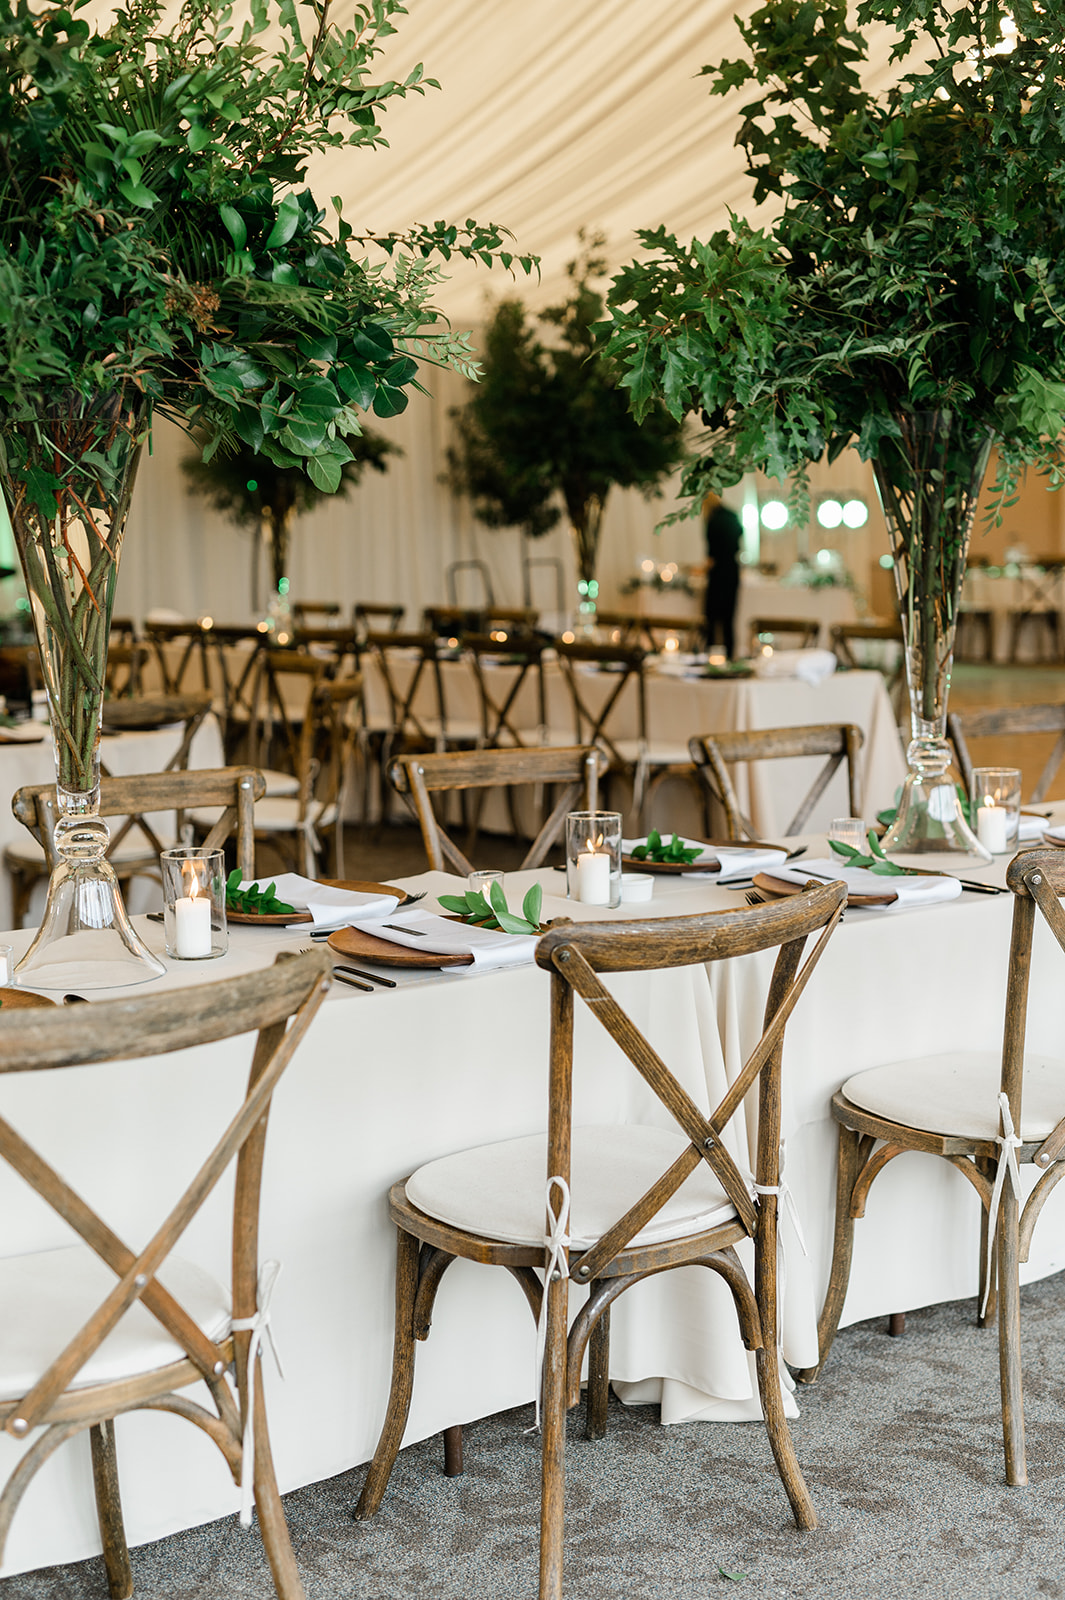 Lush tablescapes with rustic chairs and bountiful local Oregon greenery